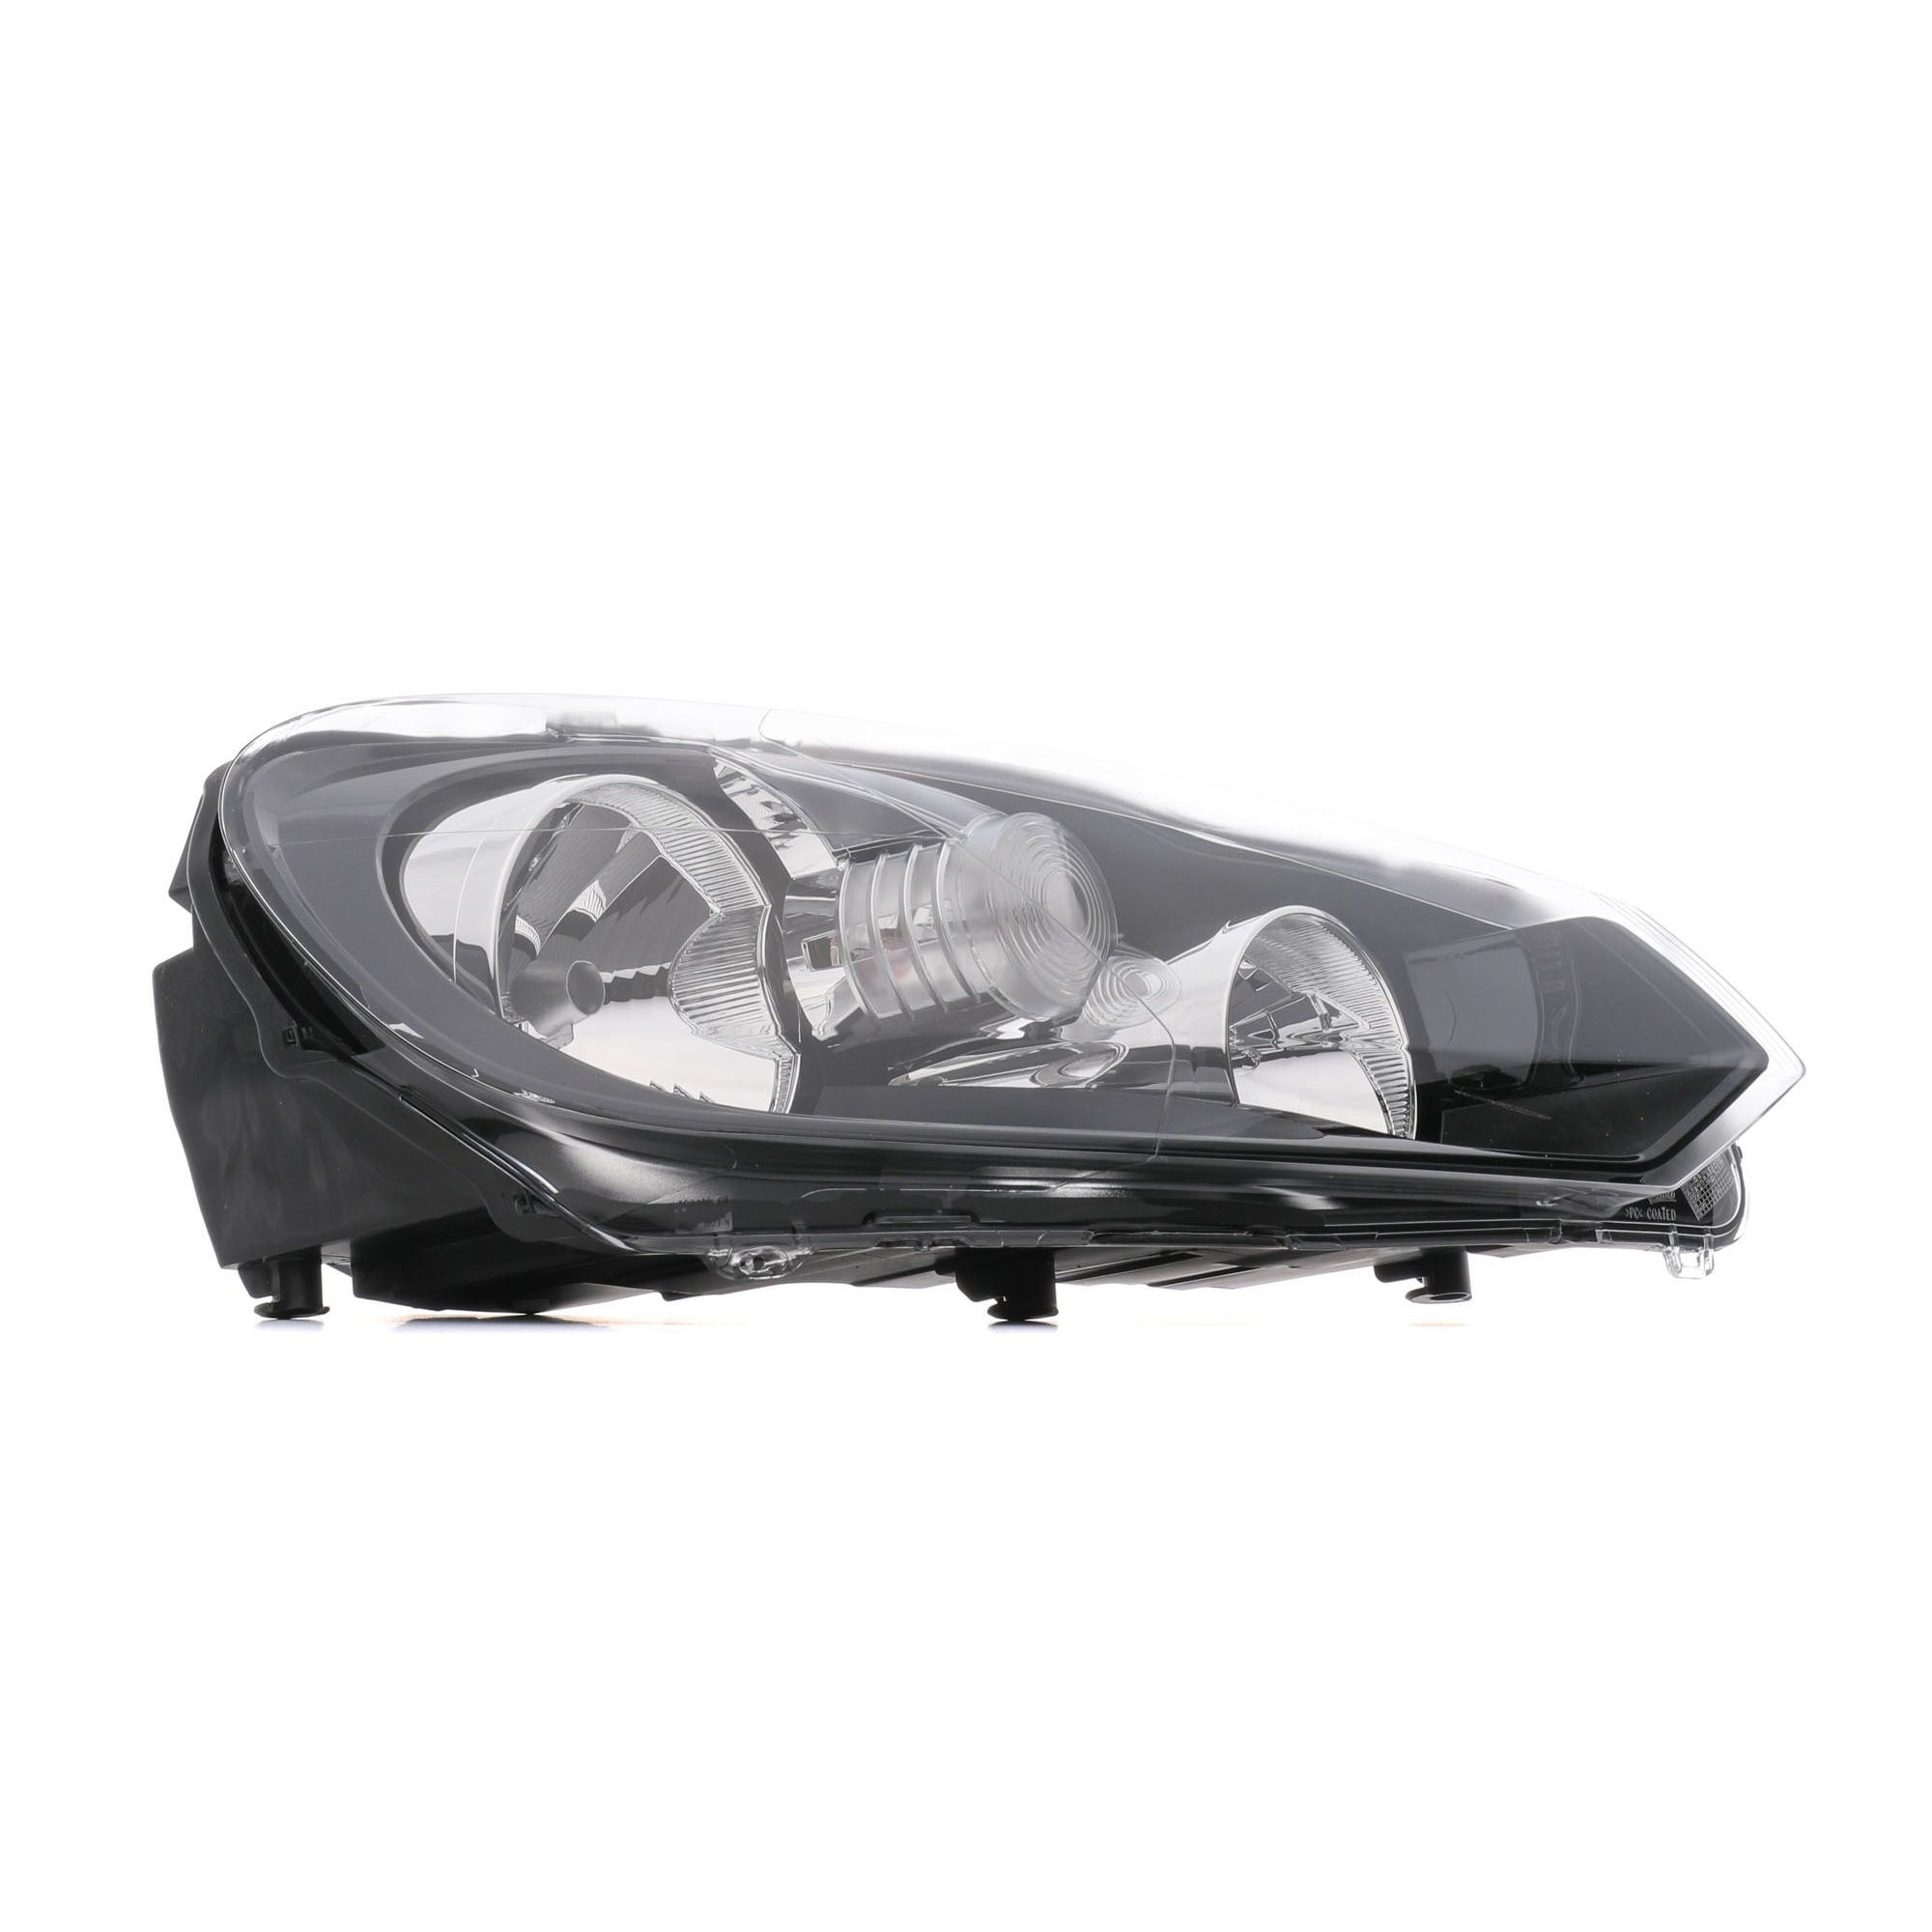 043851 VALEO Headlight ROVER Right, H7, H15, W5W, PSY24W, Halogen, transparent, with low beam, with daytime running light, for right-hand traffic, ORIGINAL PART, without motor for headlamp levelling